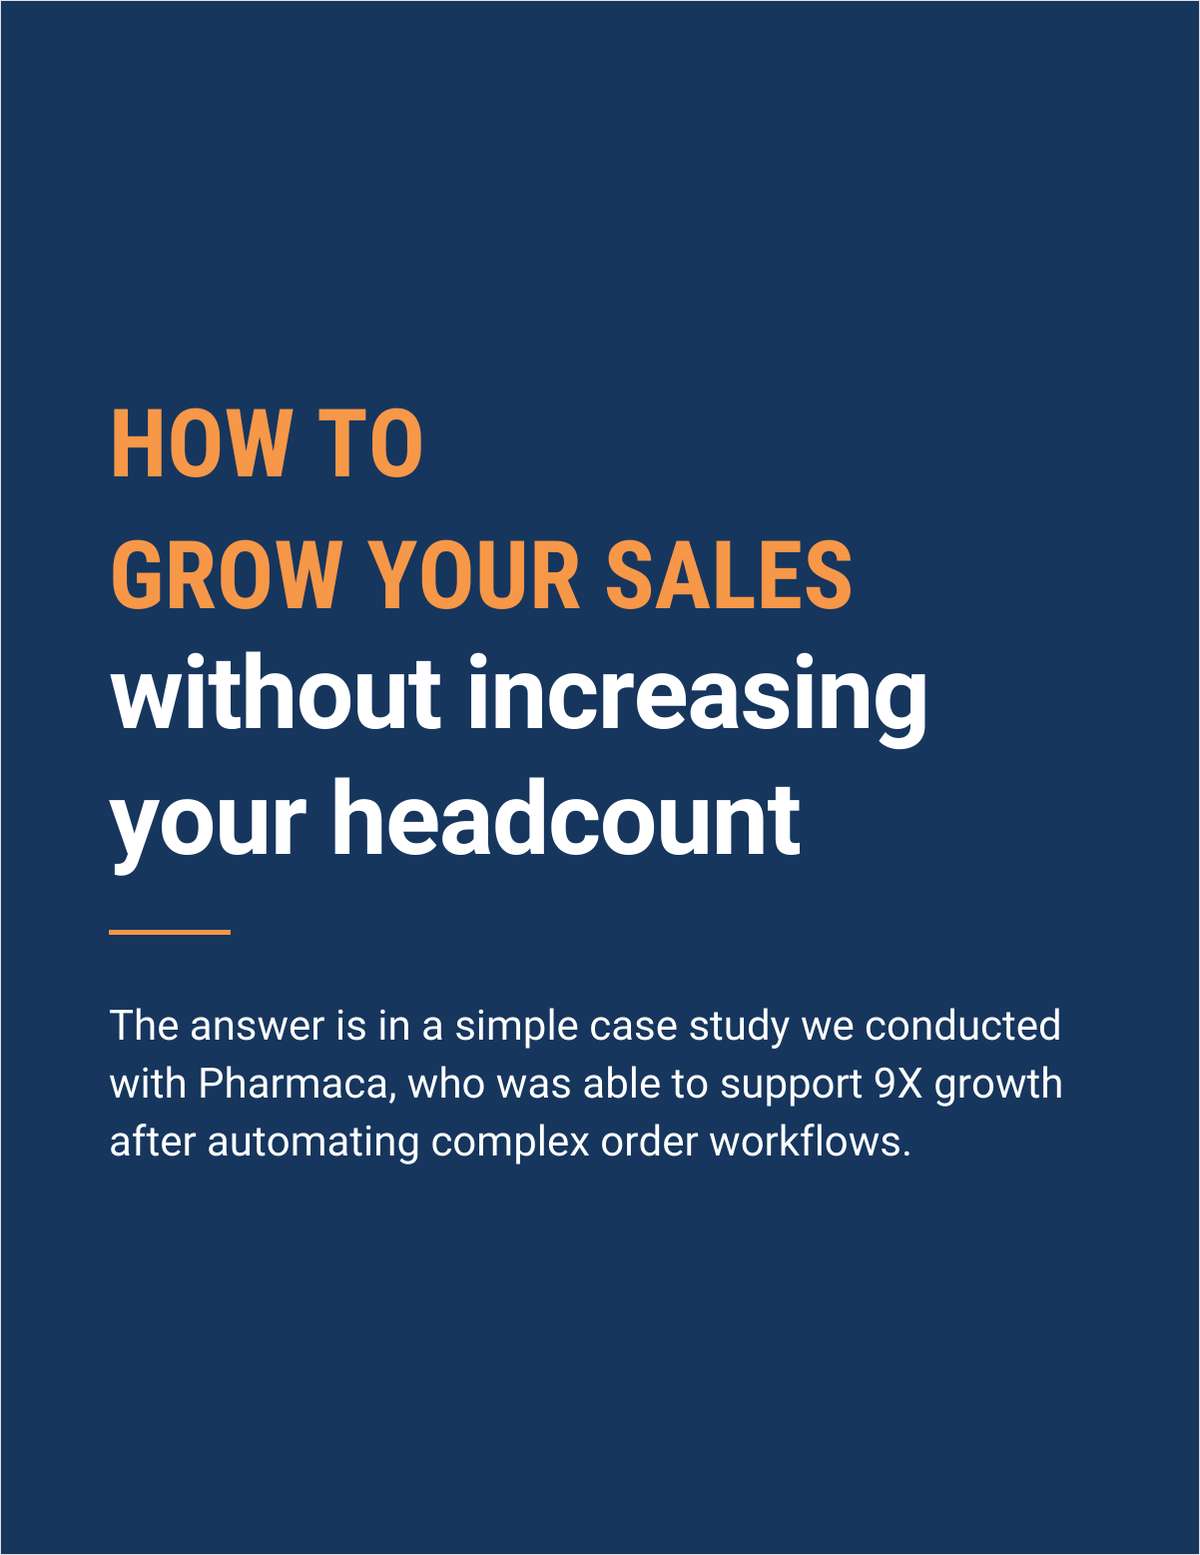 Need to deliver digital commerce growth but your hands are tied for adding headcount? Here's a case study for that.